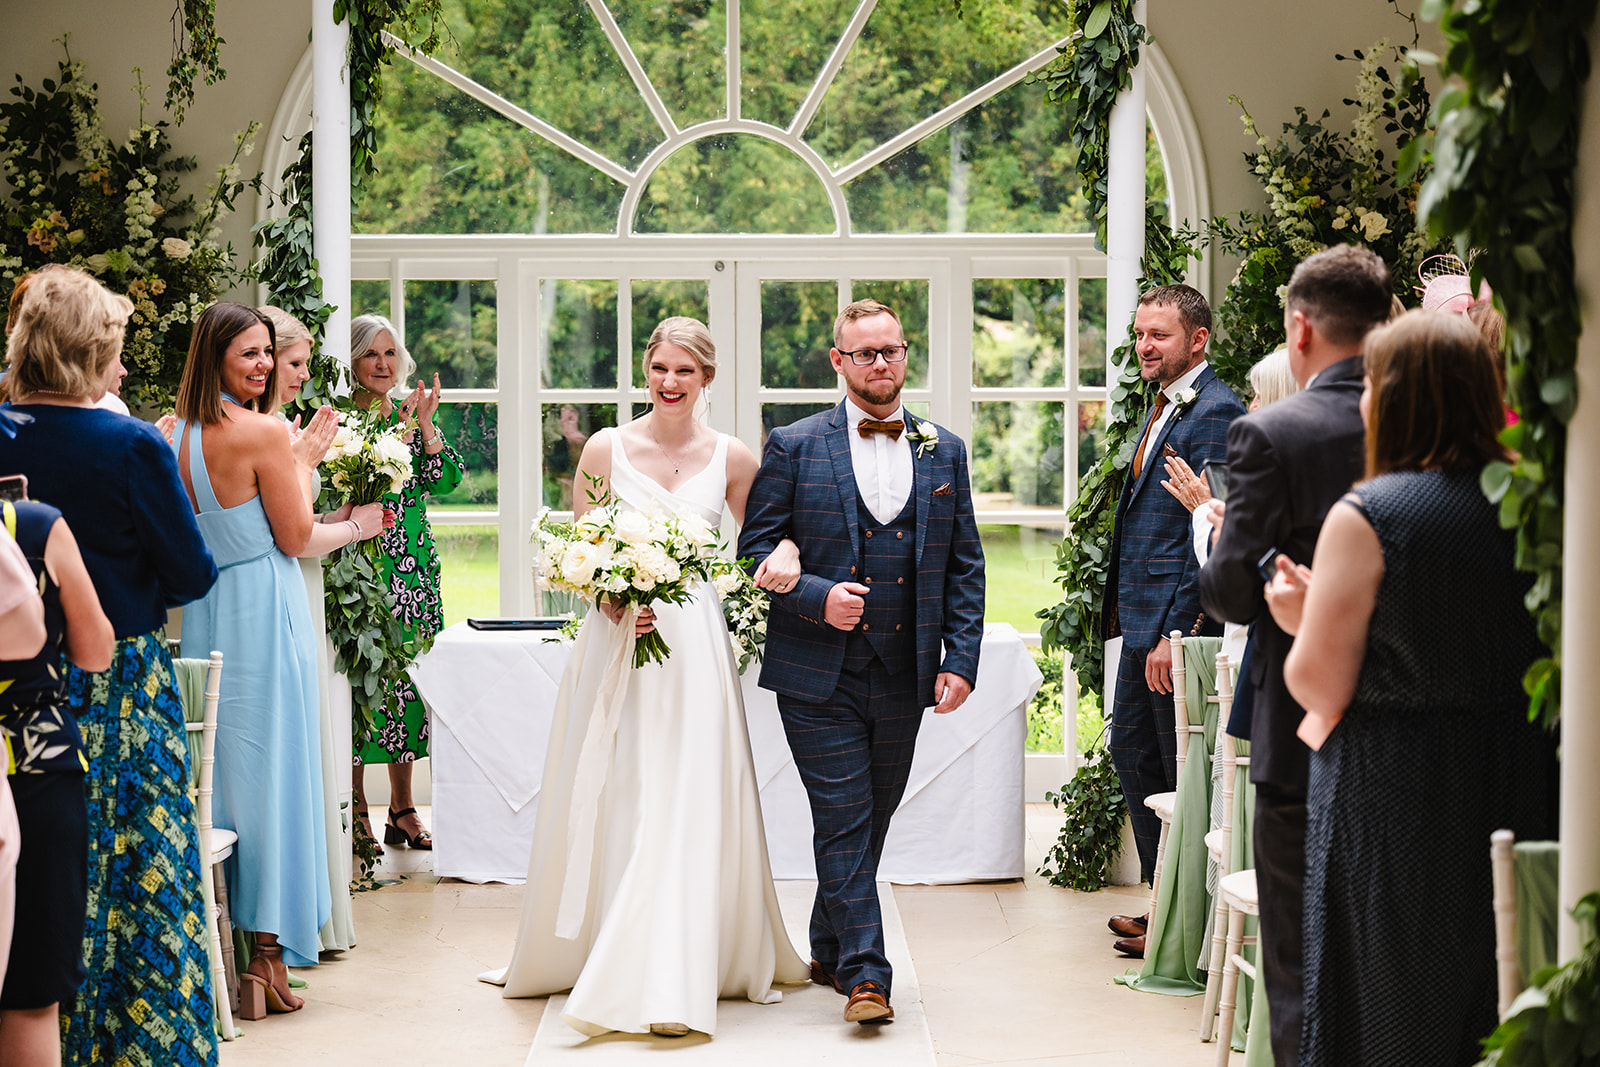 Bride and groom walking back down the aisle in the orangery at Stapleford Park hotel by Amanda Forman Photography
